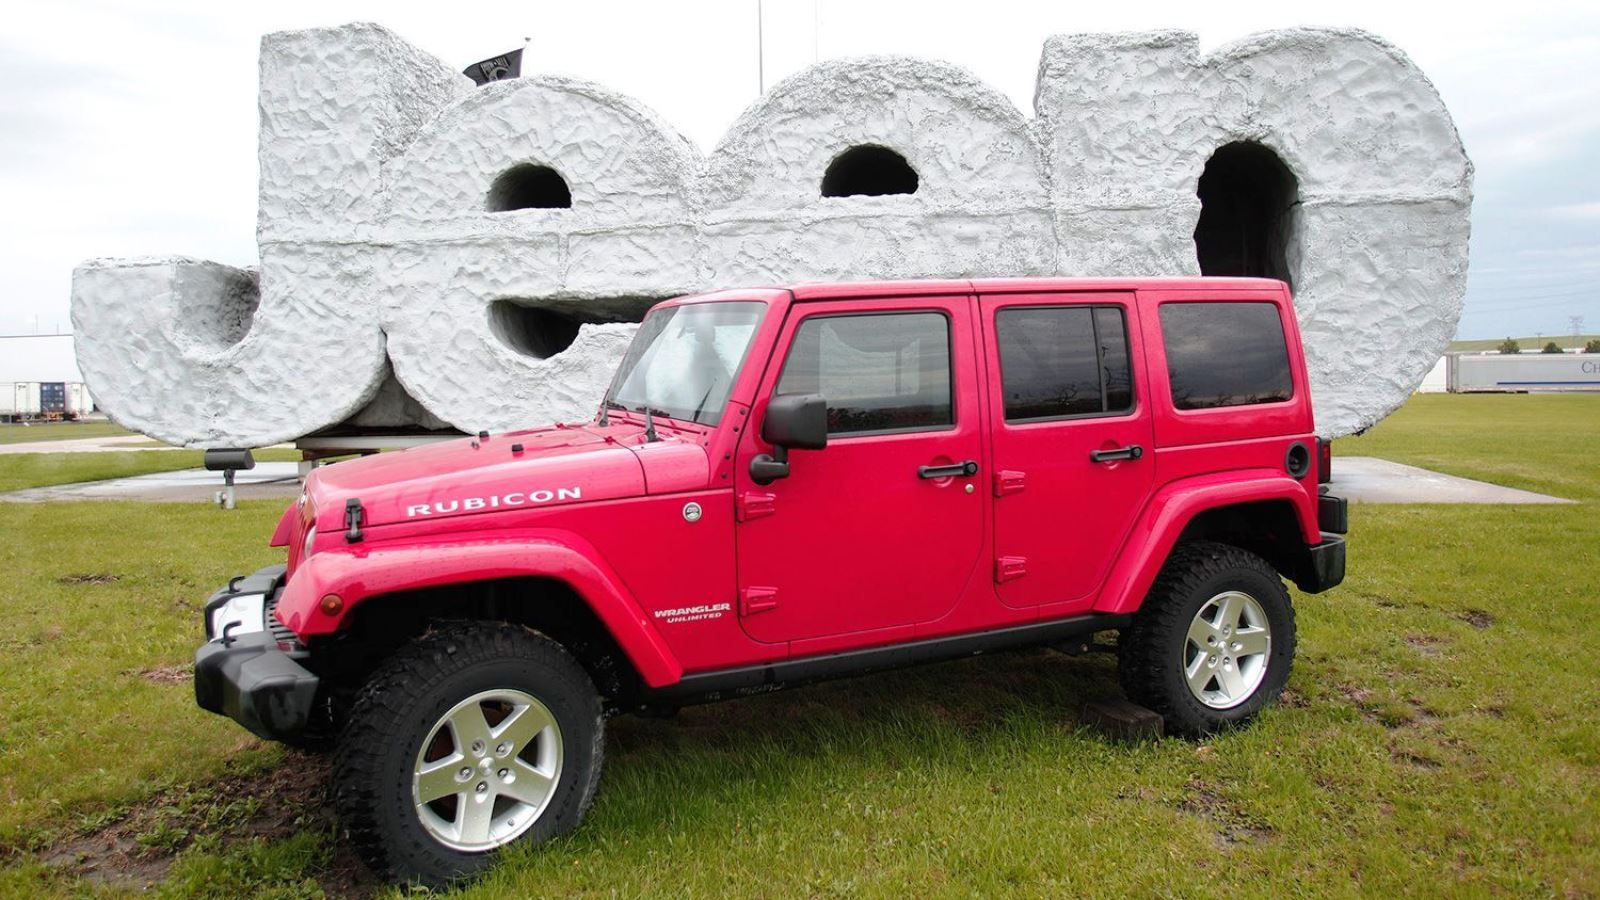 5 Reasons to Get Mom a Jeep for Mother's Day | Jk-forum